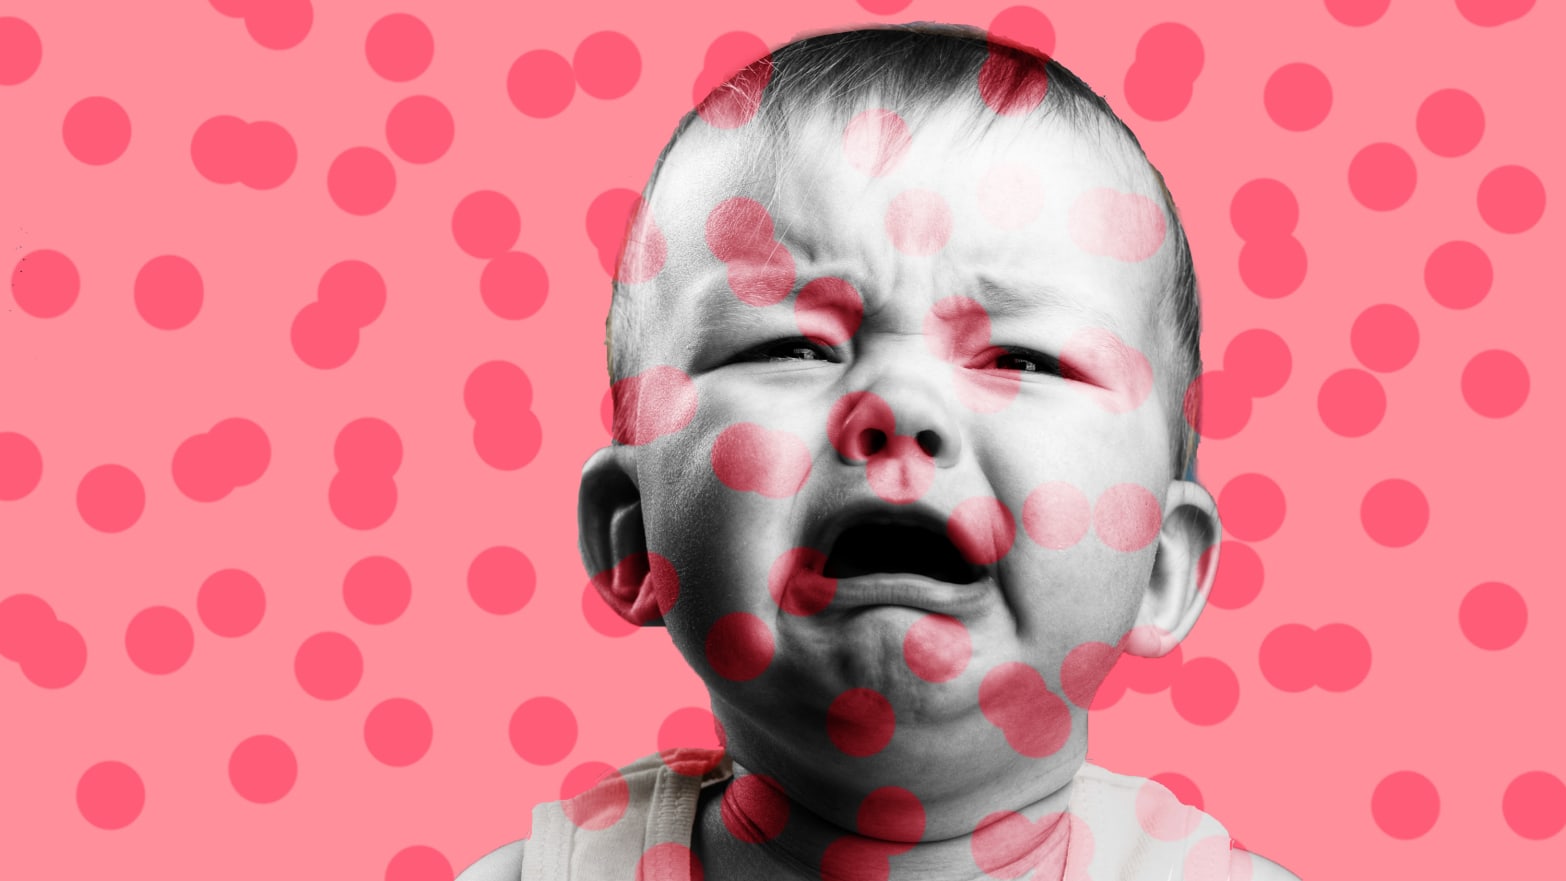 image of crying baby with pink background and darker spots all over measles rockland county new york unvaccinated minors antivaxxer anti vaxxer easter passover